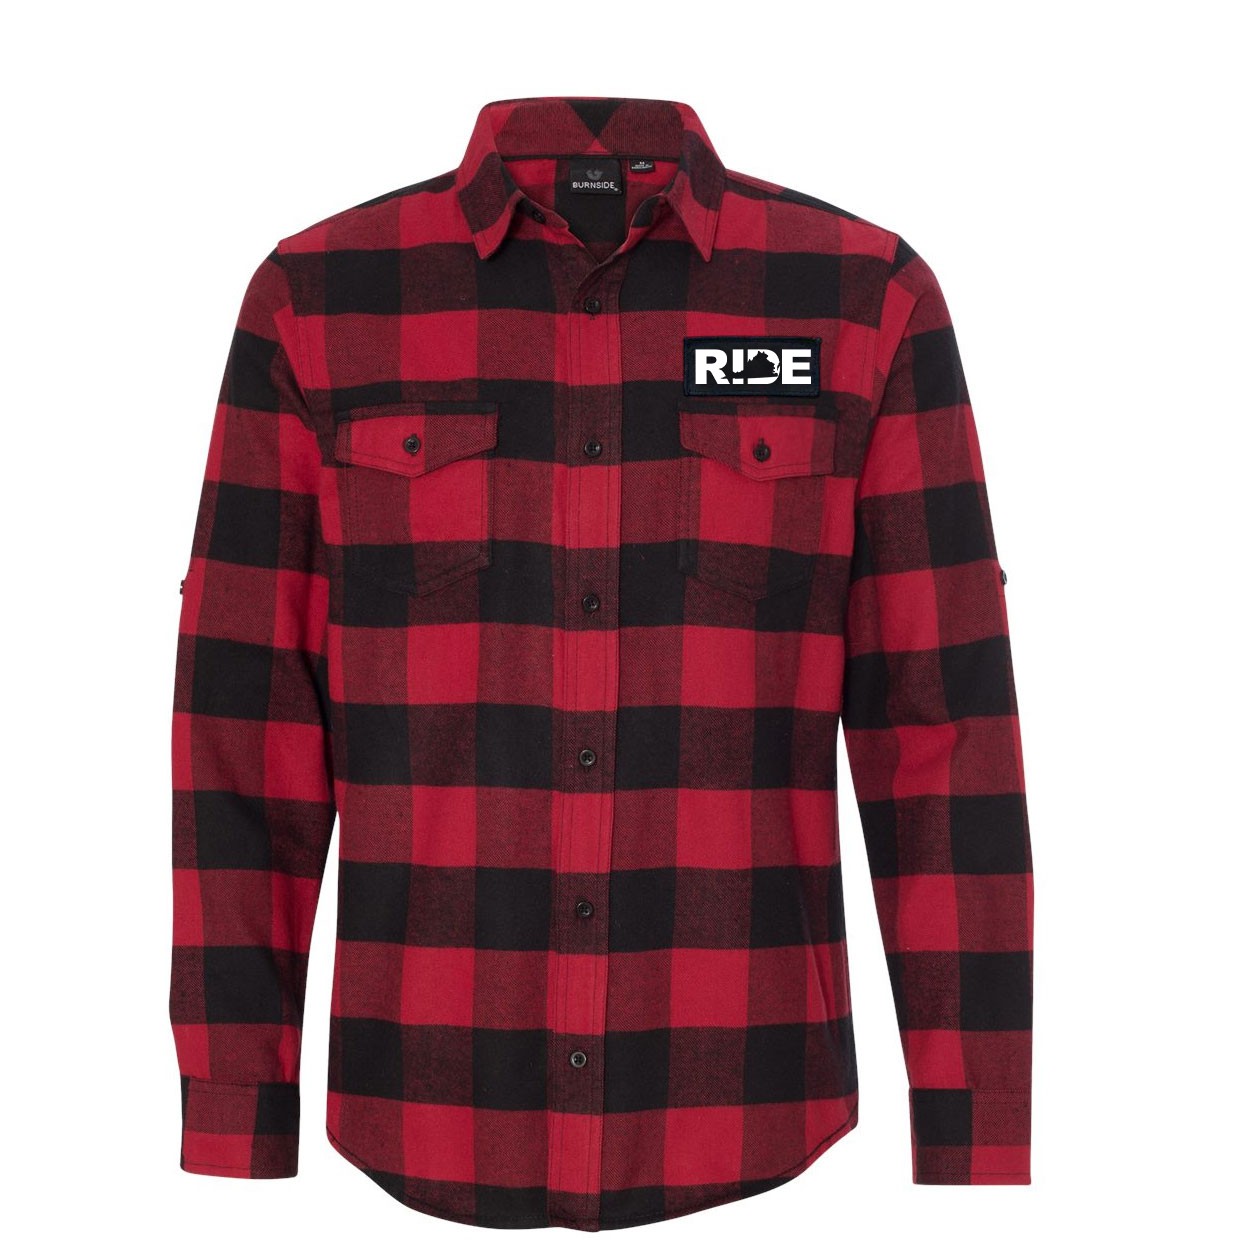 Ride Virginia Classic Unisex Long Sleeve Woven Patch Flannel Shirt Red/Black Buffalo (White Logo)